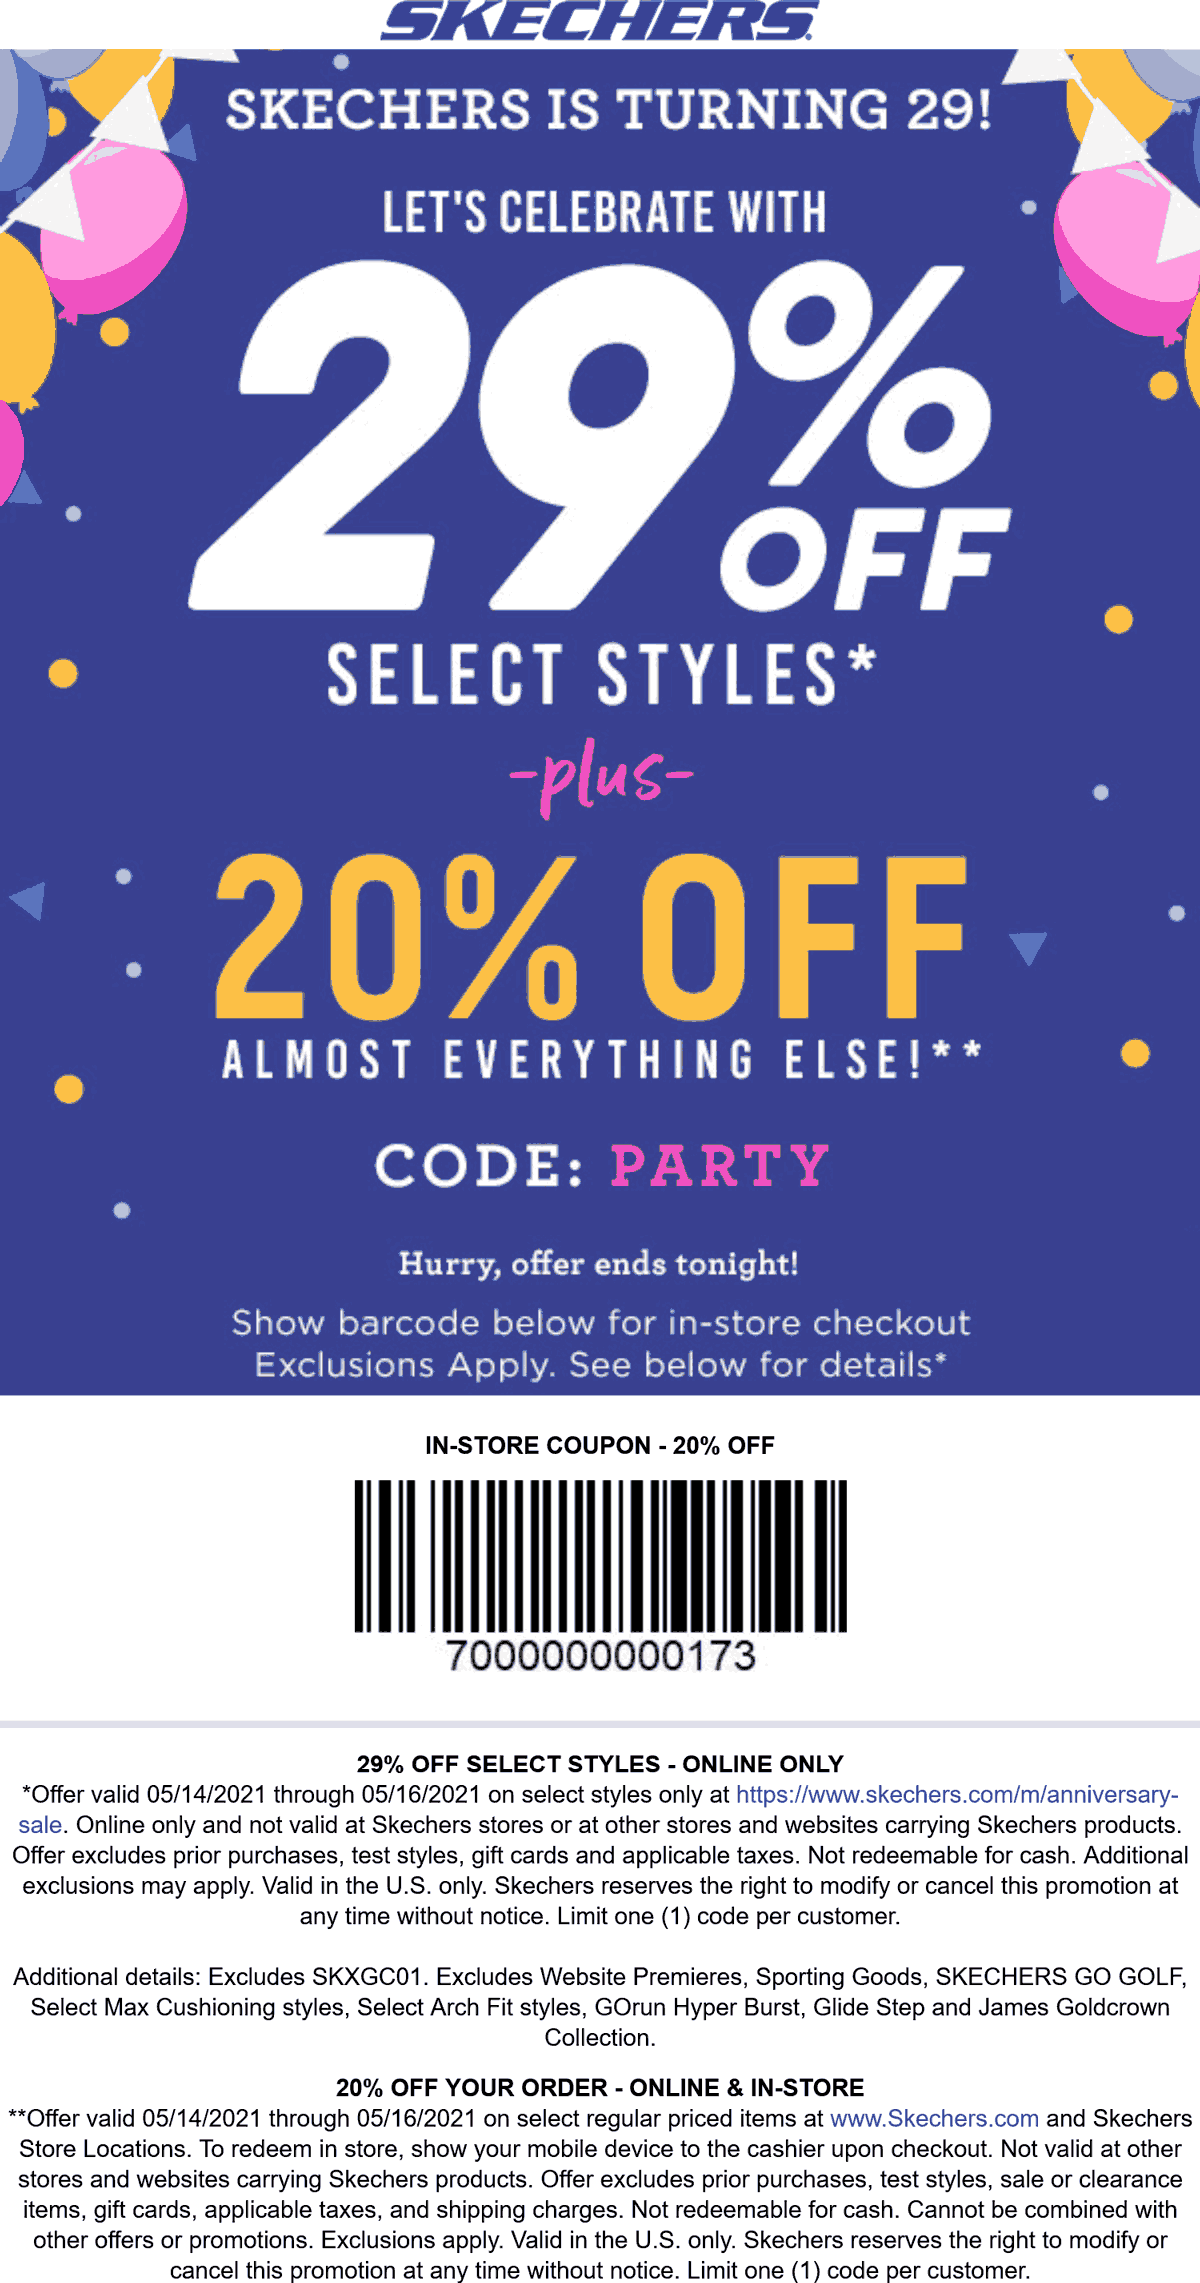 Skechers stores Coupon  20-29% off today at Skechers, or online via promo code PARTY #skechers 